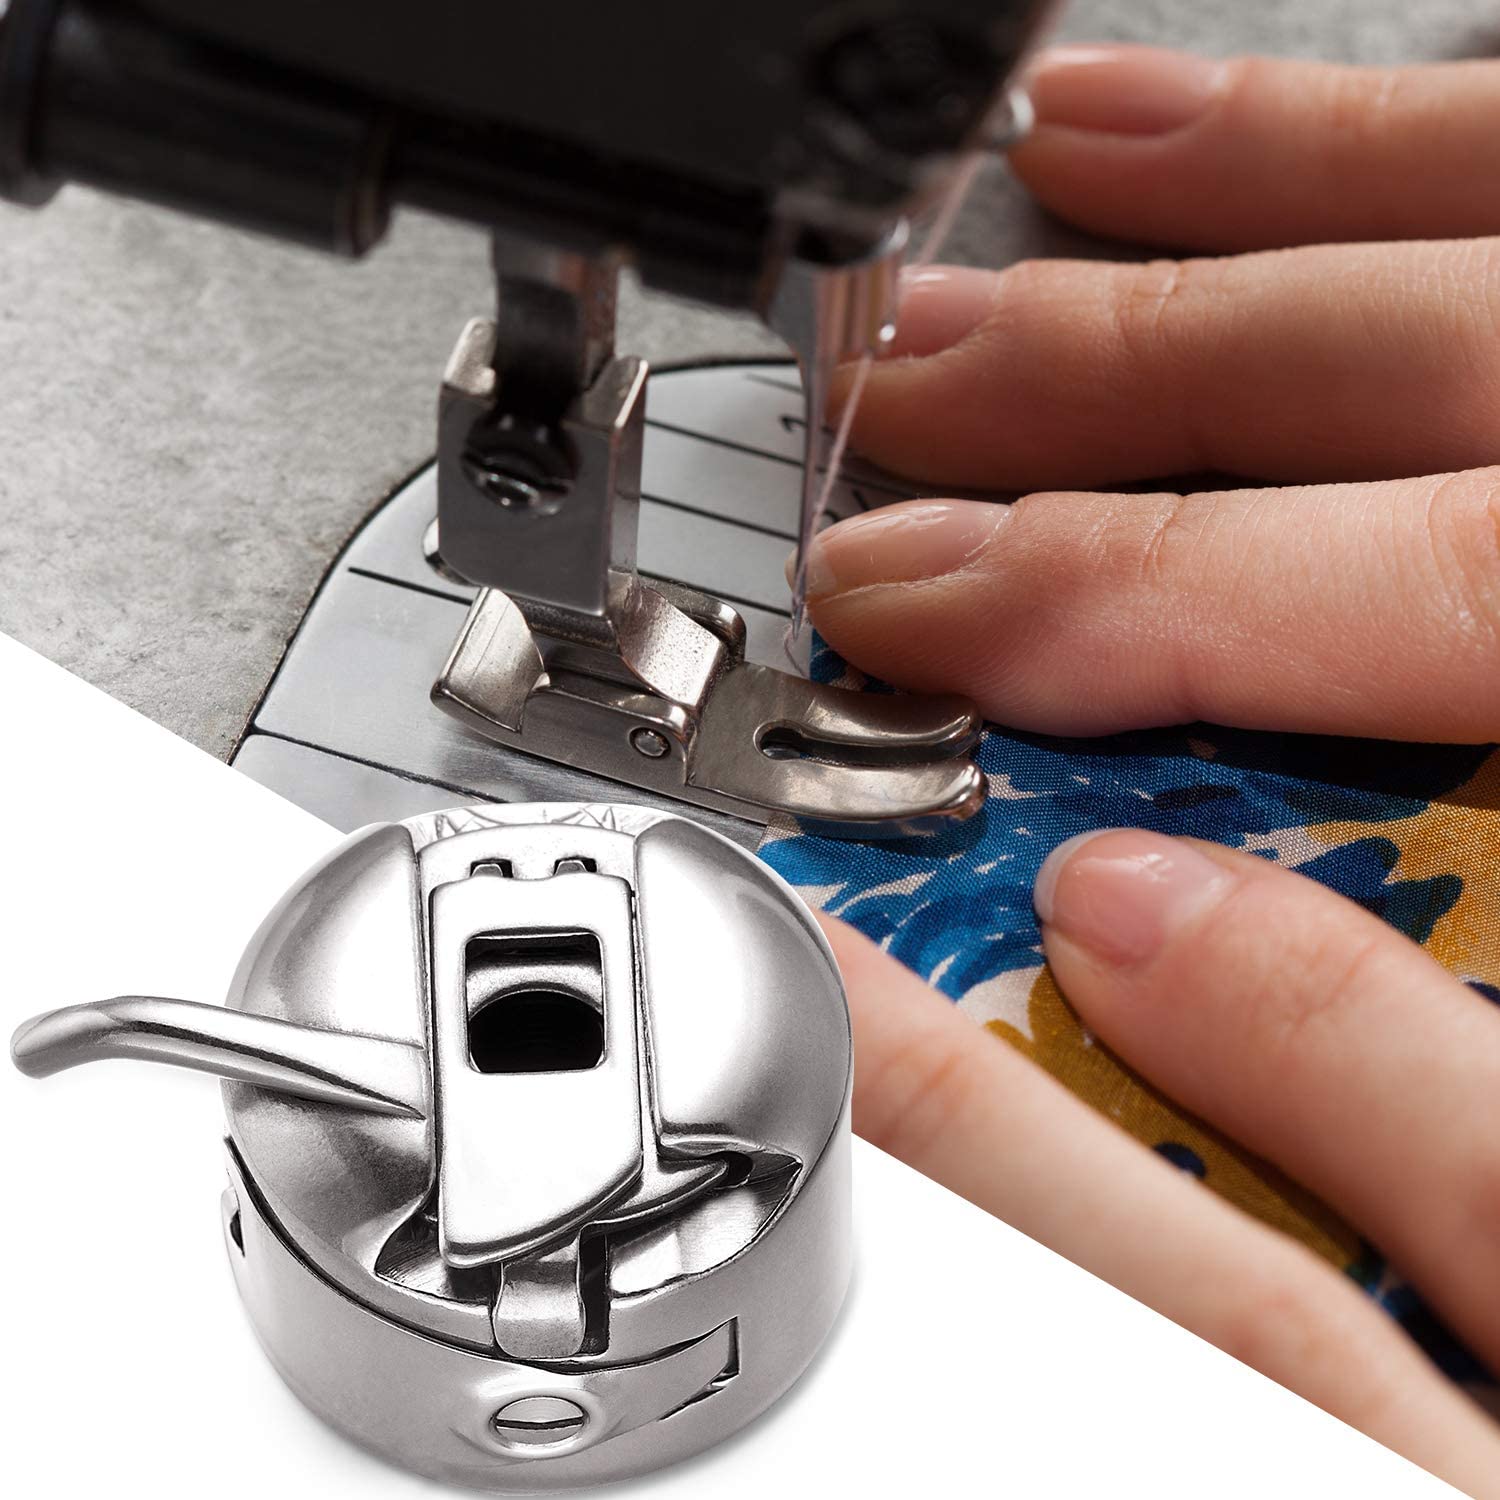 Replacement Embroidery Machine Bobbin Case. Compatible for nearly